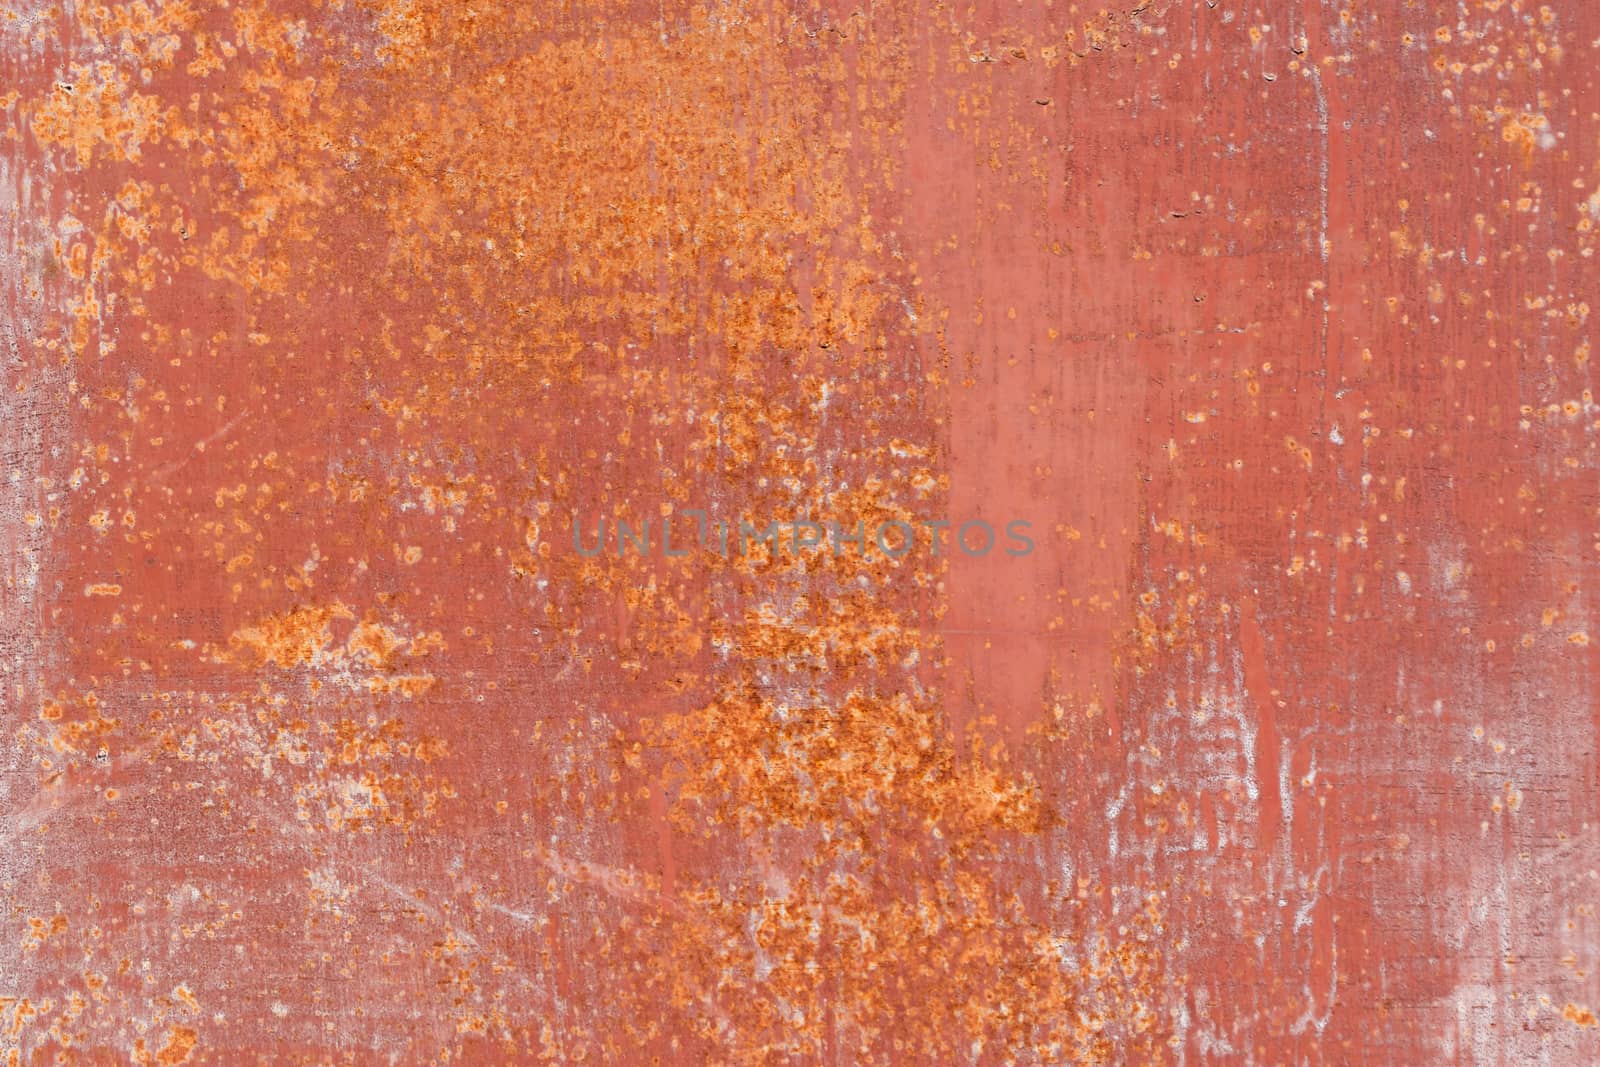 scratched orange metal surface by Chechotkin